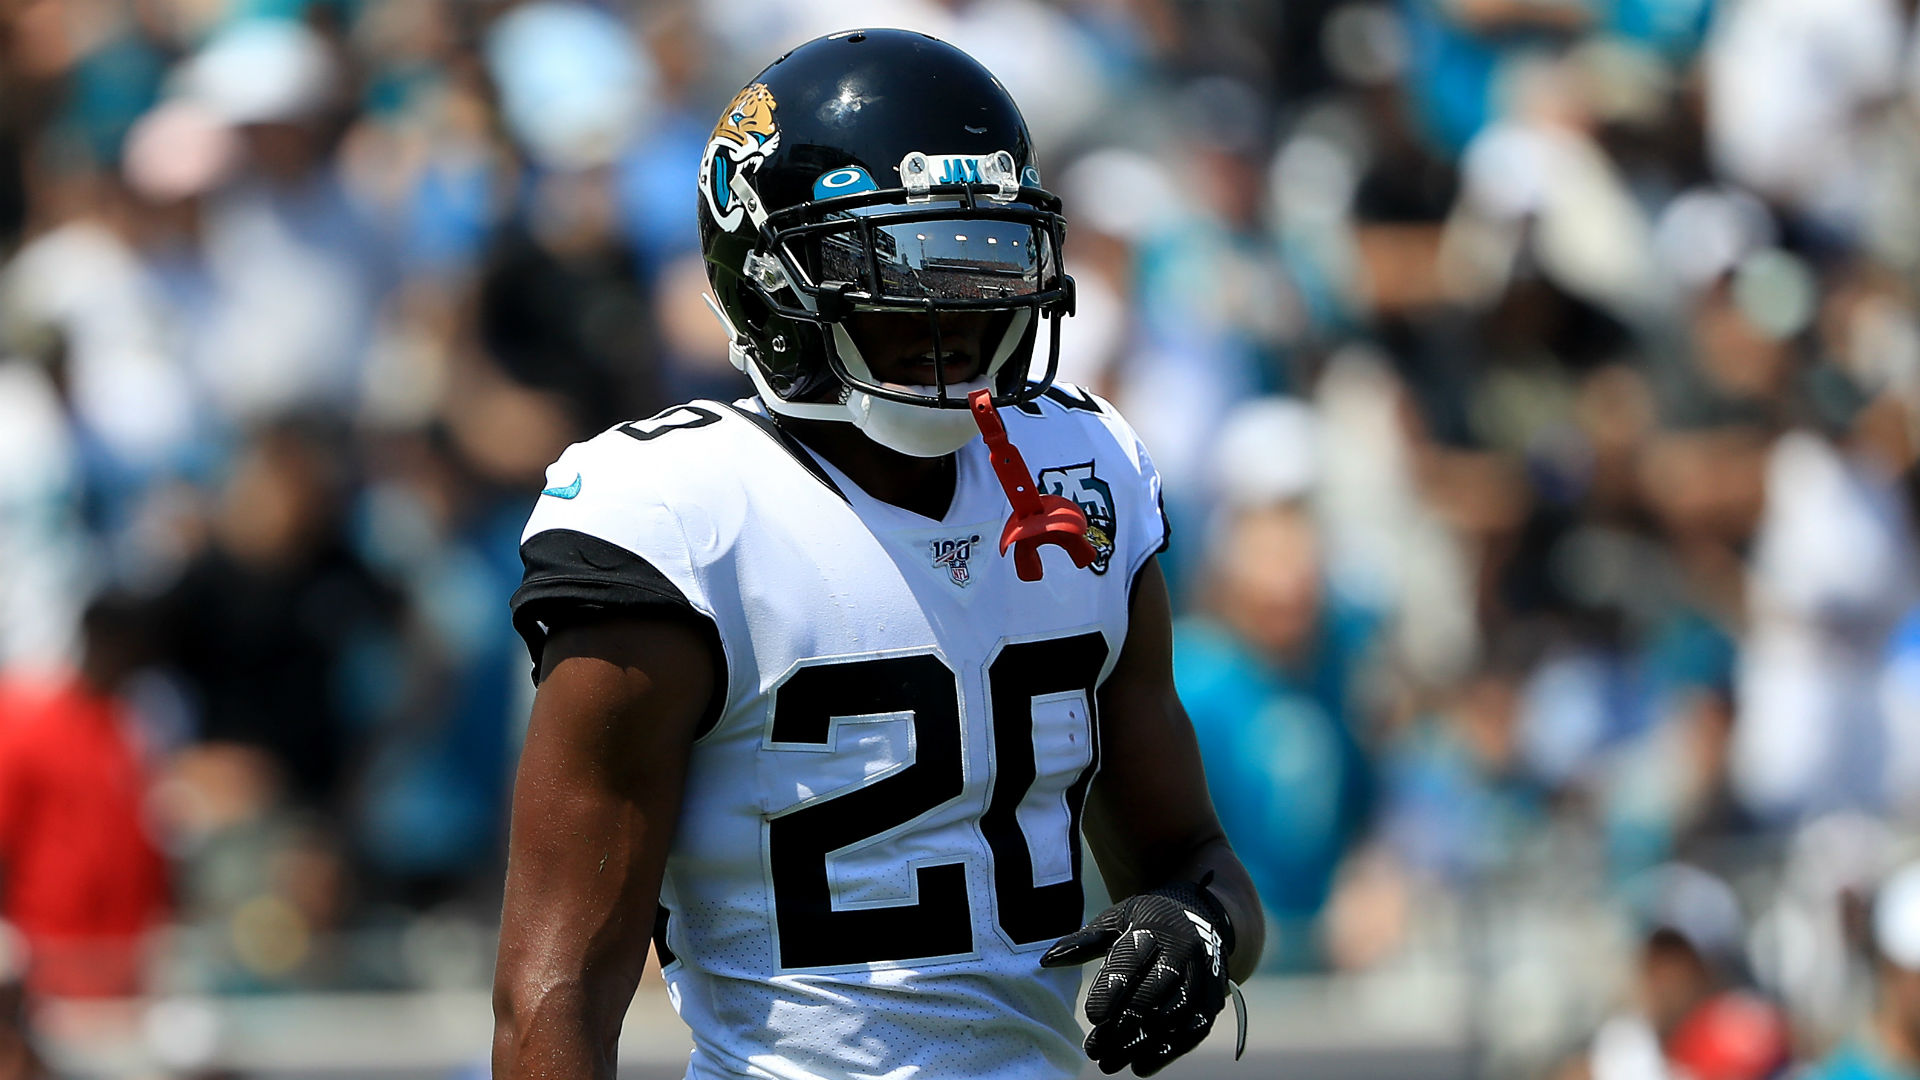 Jalen Ramsey saw a back specialist in Houston this week after missing Jacksonville's last two games and is now set to return to practice.